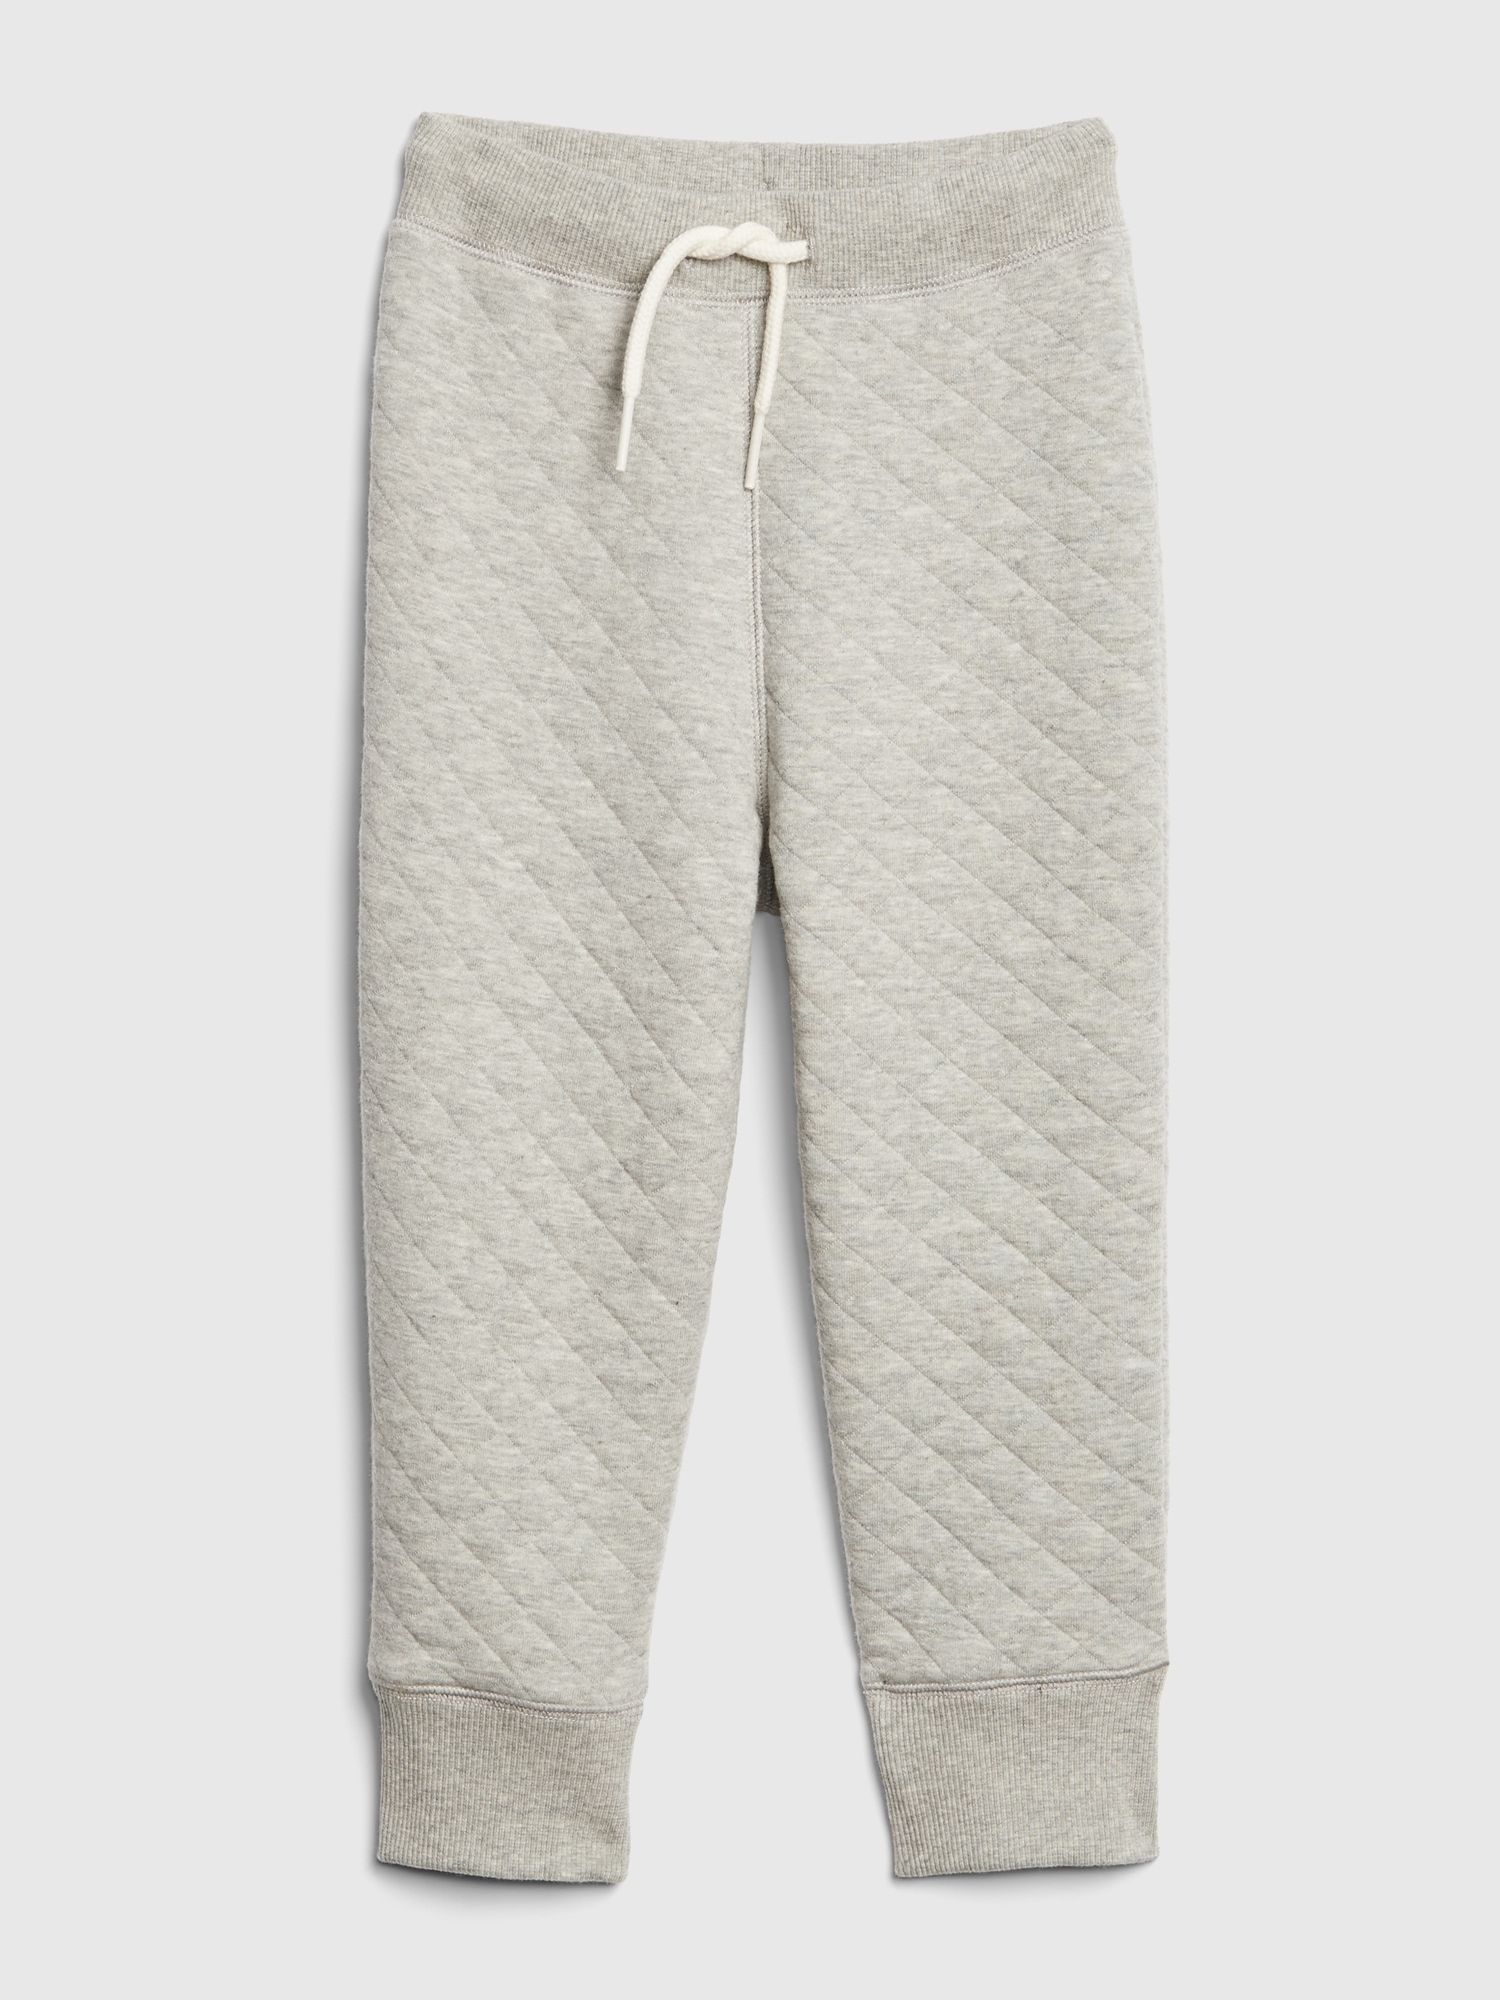 Quilted Pull-On Pants | Gap